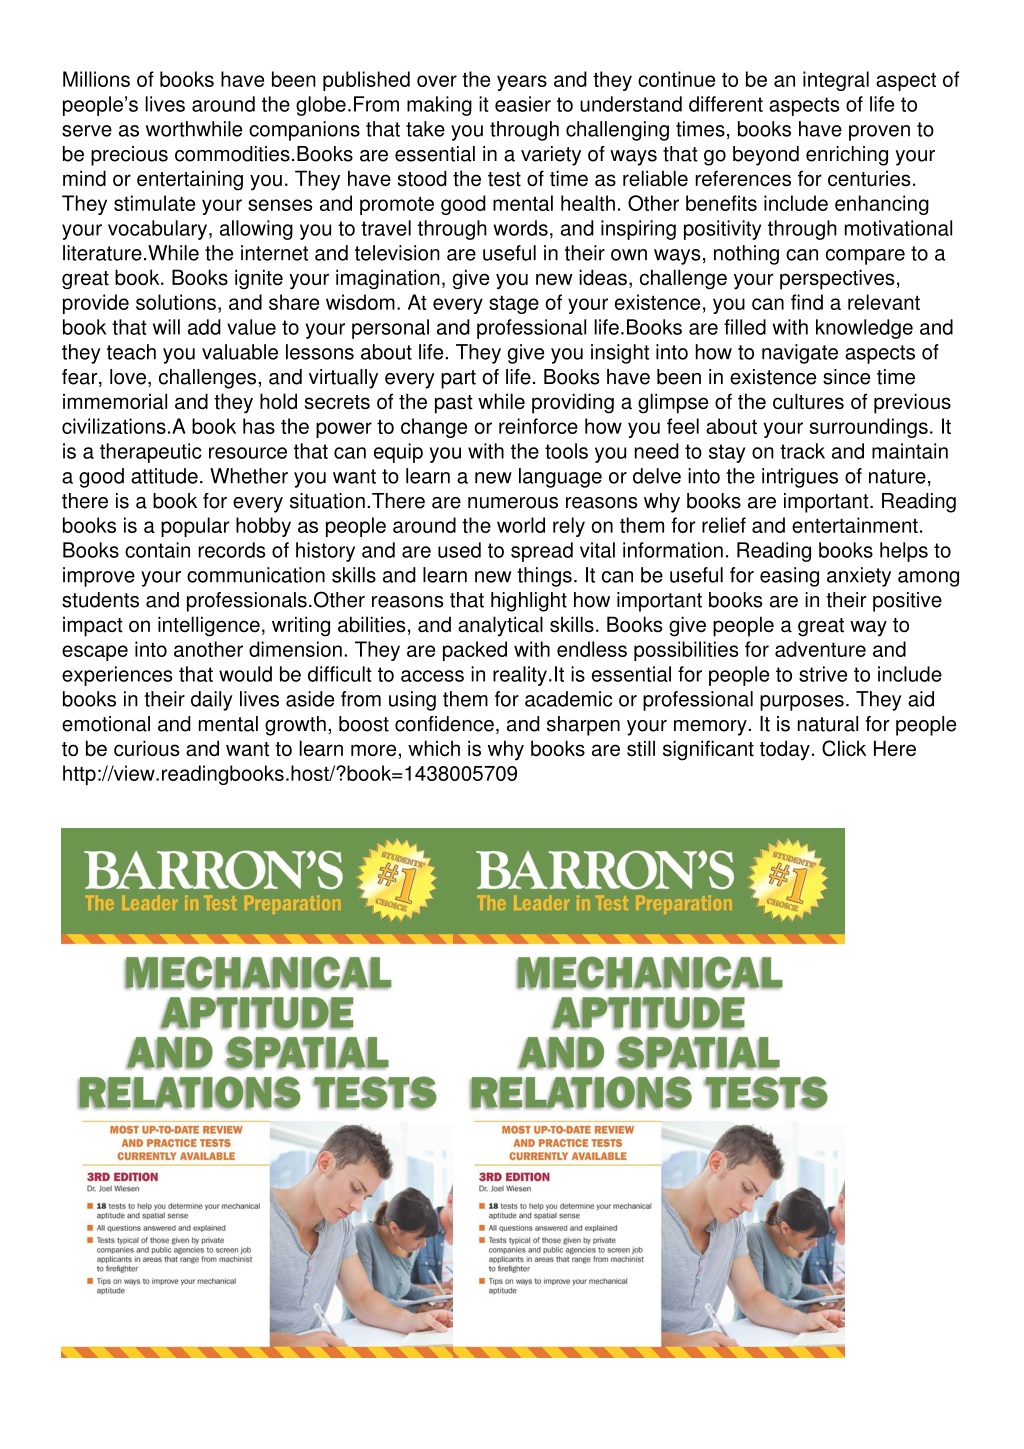 careers-books-barrons-mechanical-aptitude-and-spatial-relations-test-psychology-iresearchnet